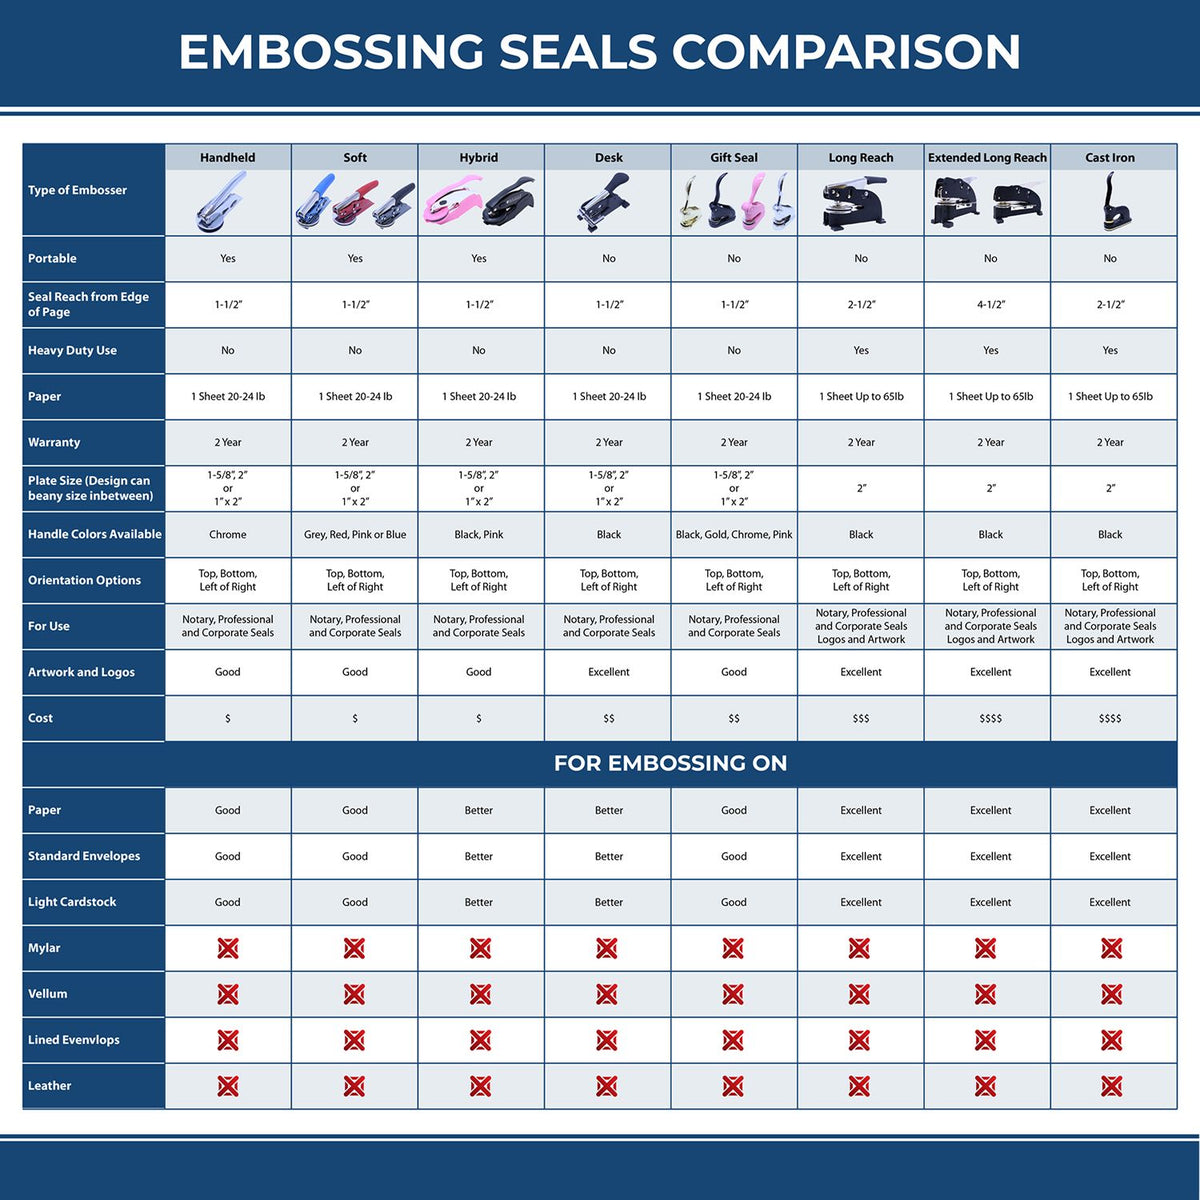 A comparison chart for the different types of mount models available for the Long Reach New York Geology Seal